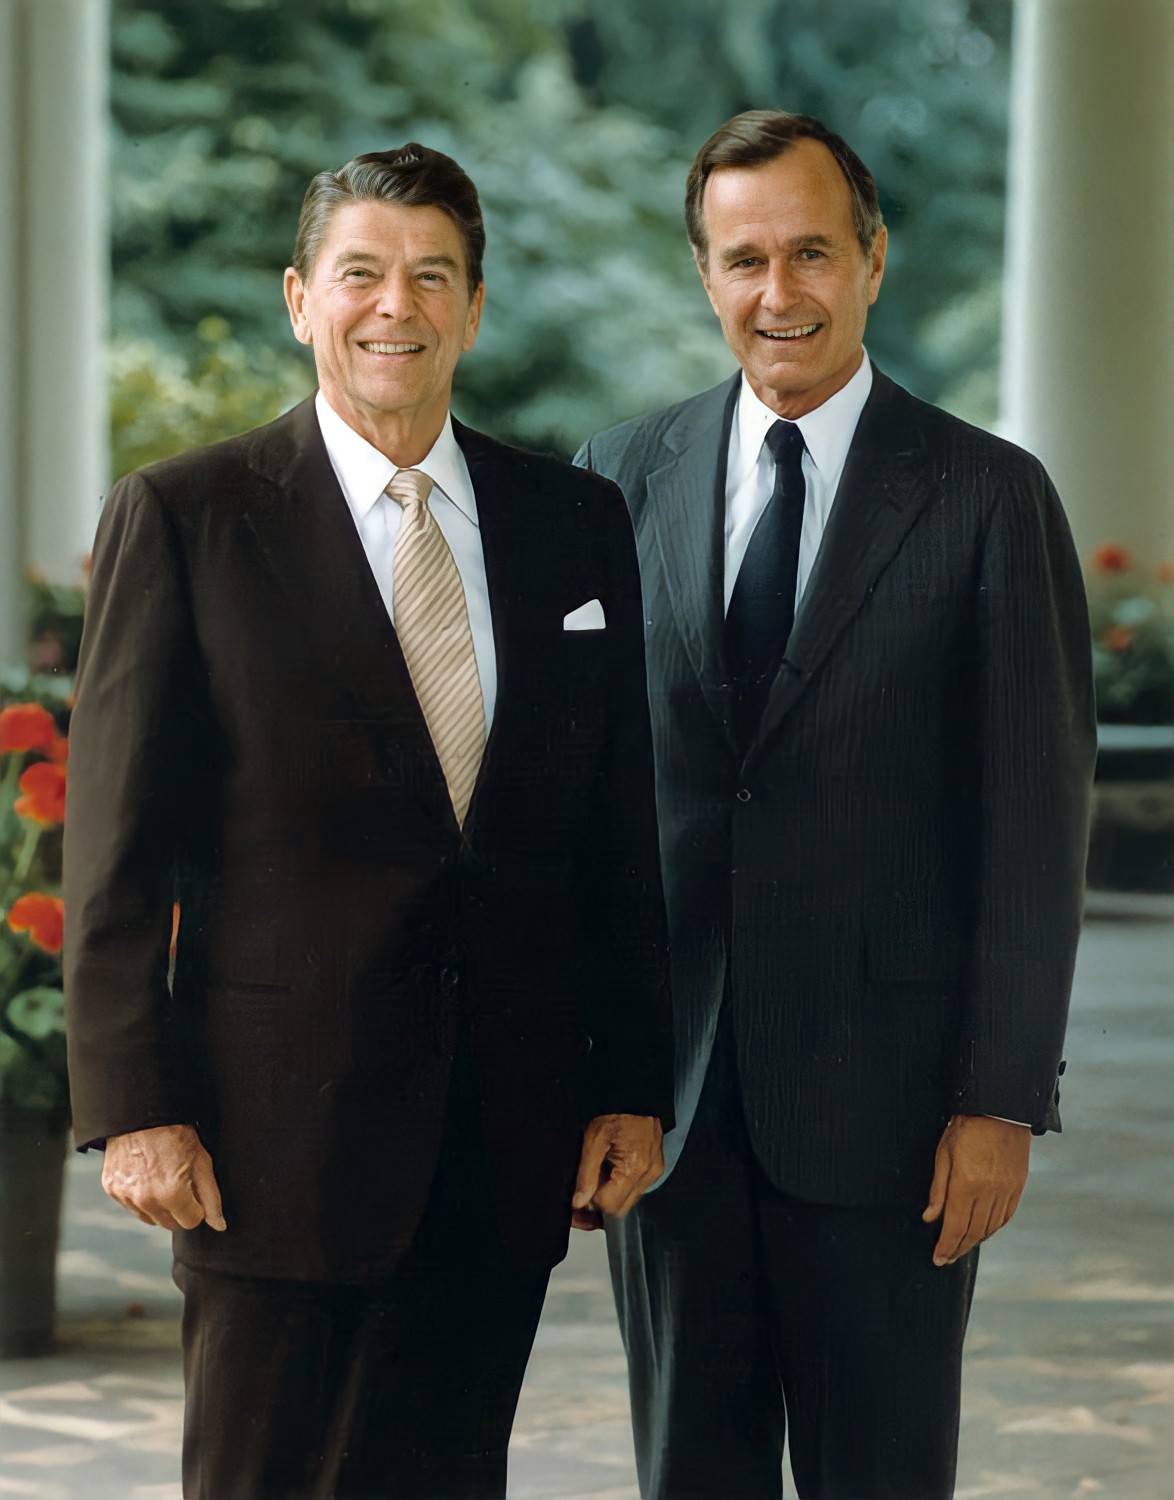 2 Official Portrait Of President Reagan And Vice President Bush 1981 